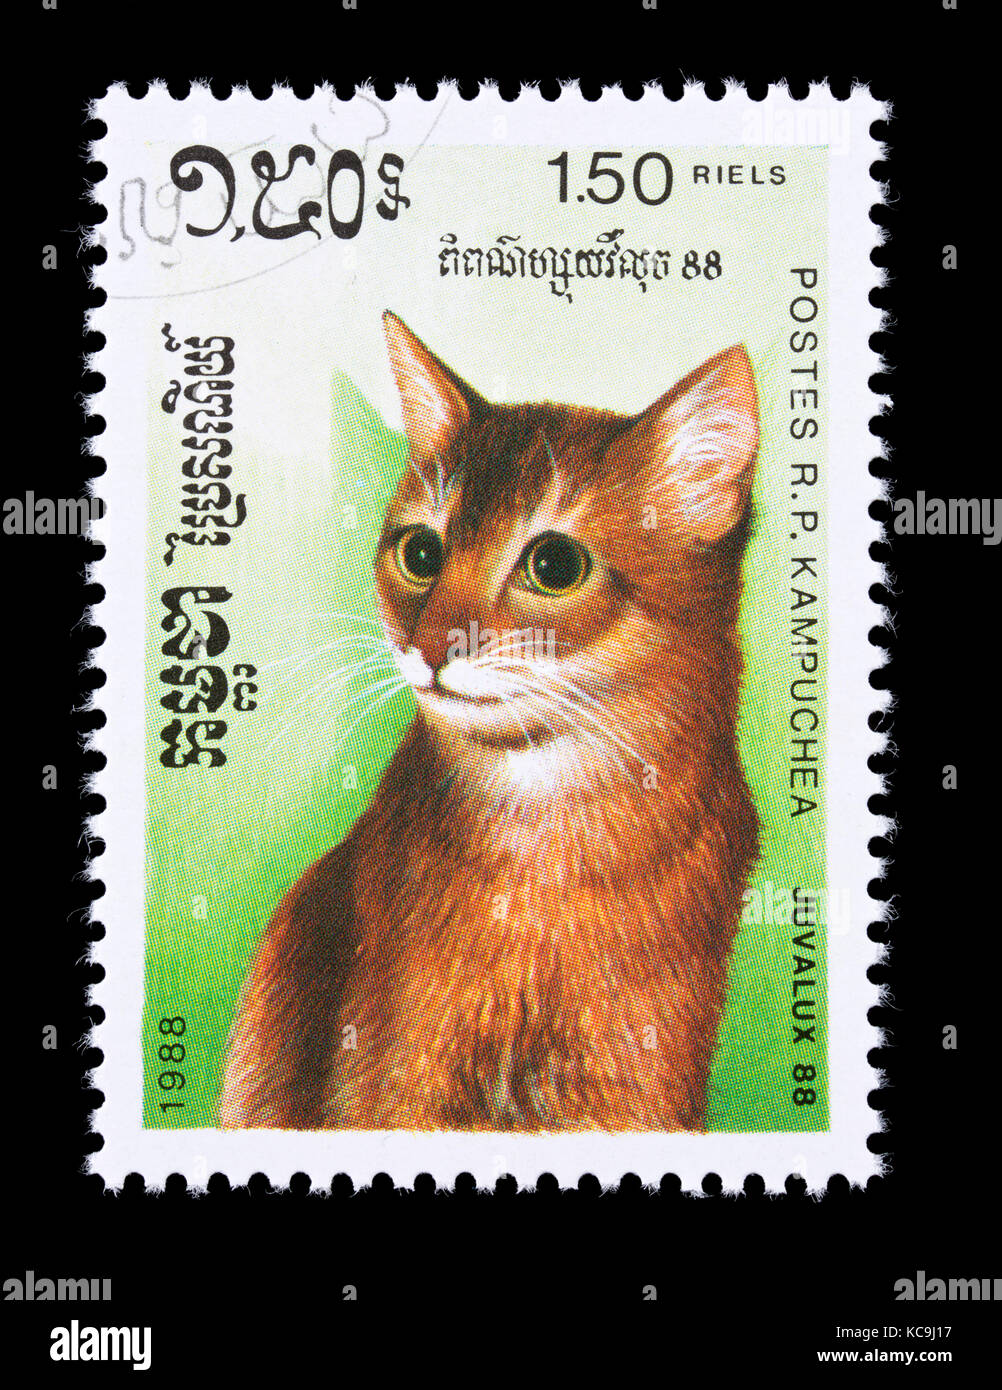 Postage stamp from Cambodia (Kampuchea) depicting a housecat. Stock Photo